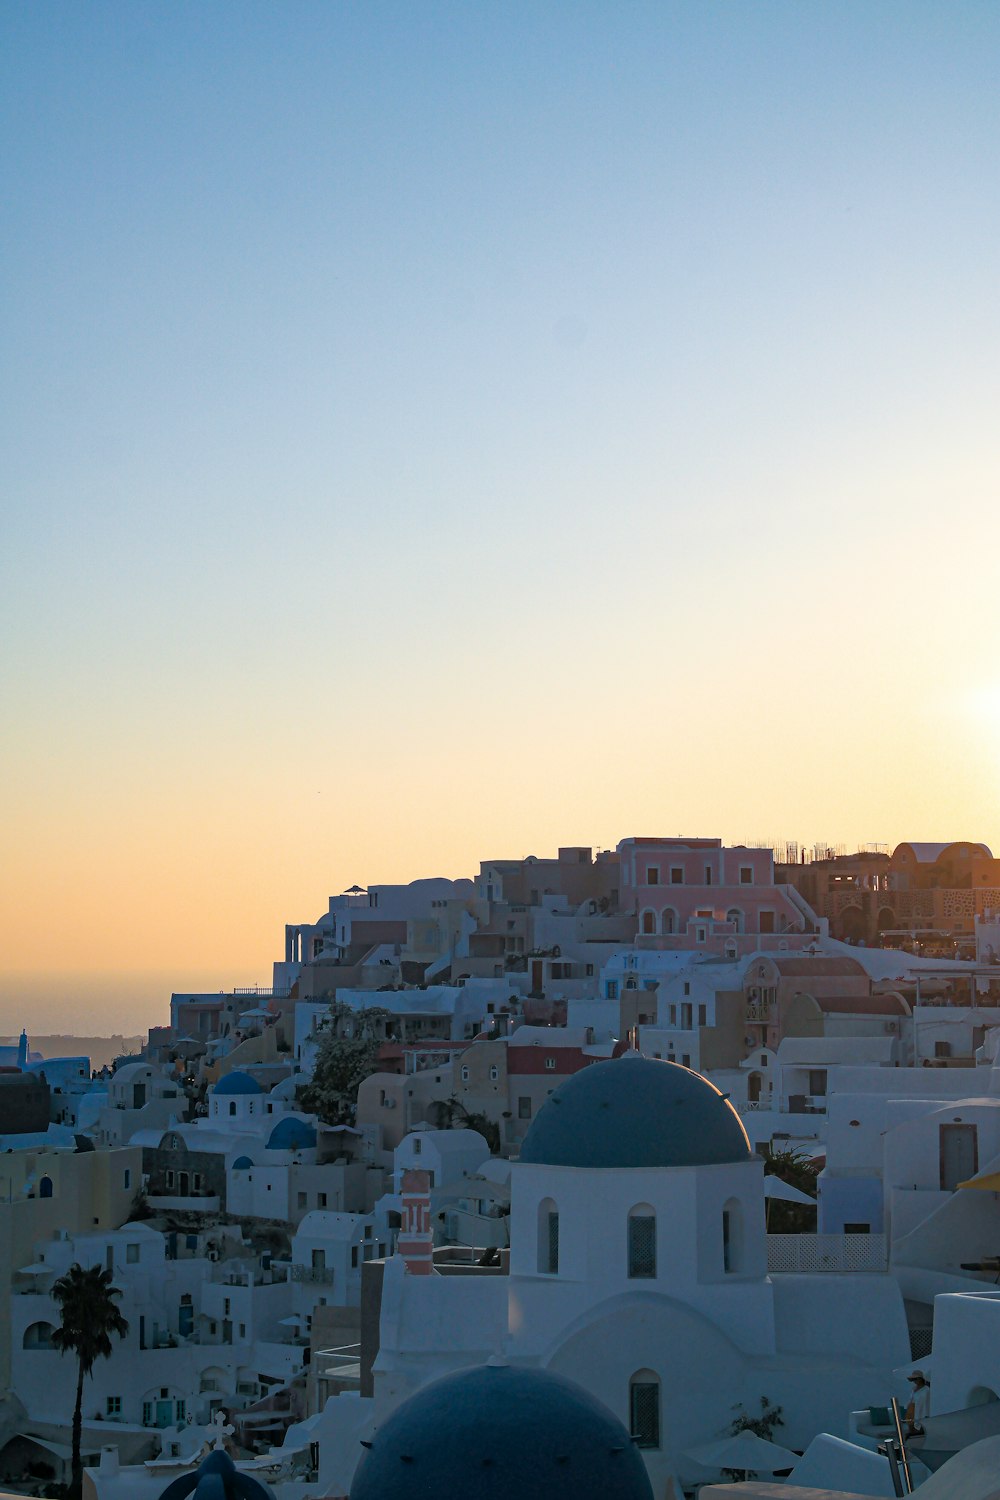 the sun is setting over a city with white buildings